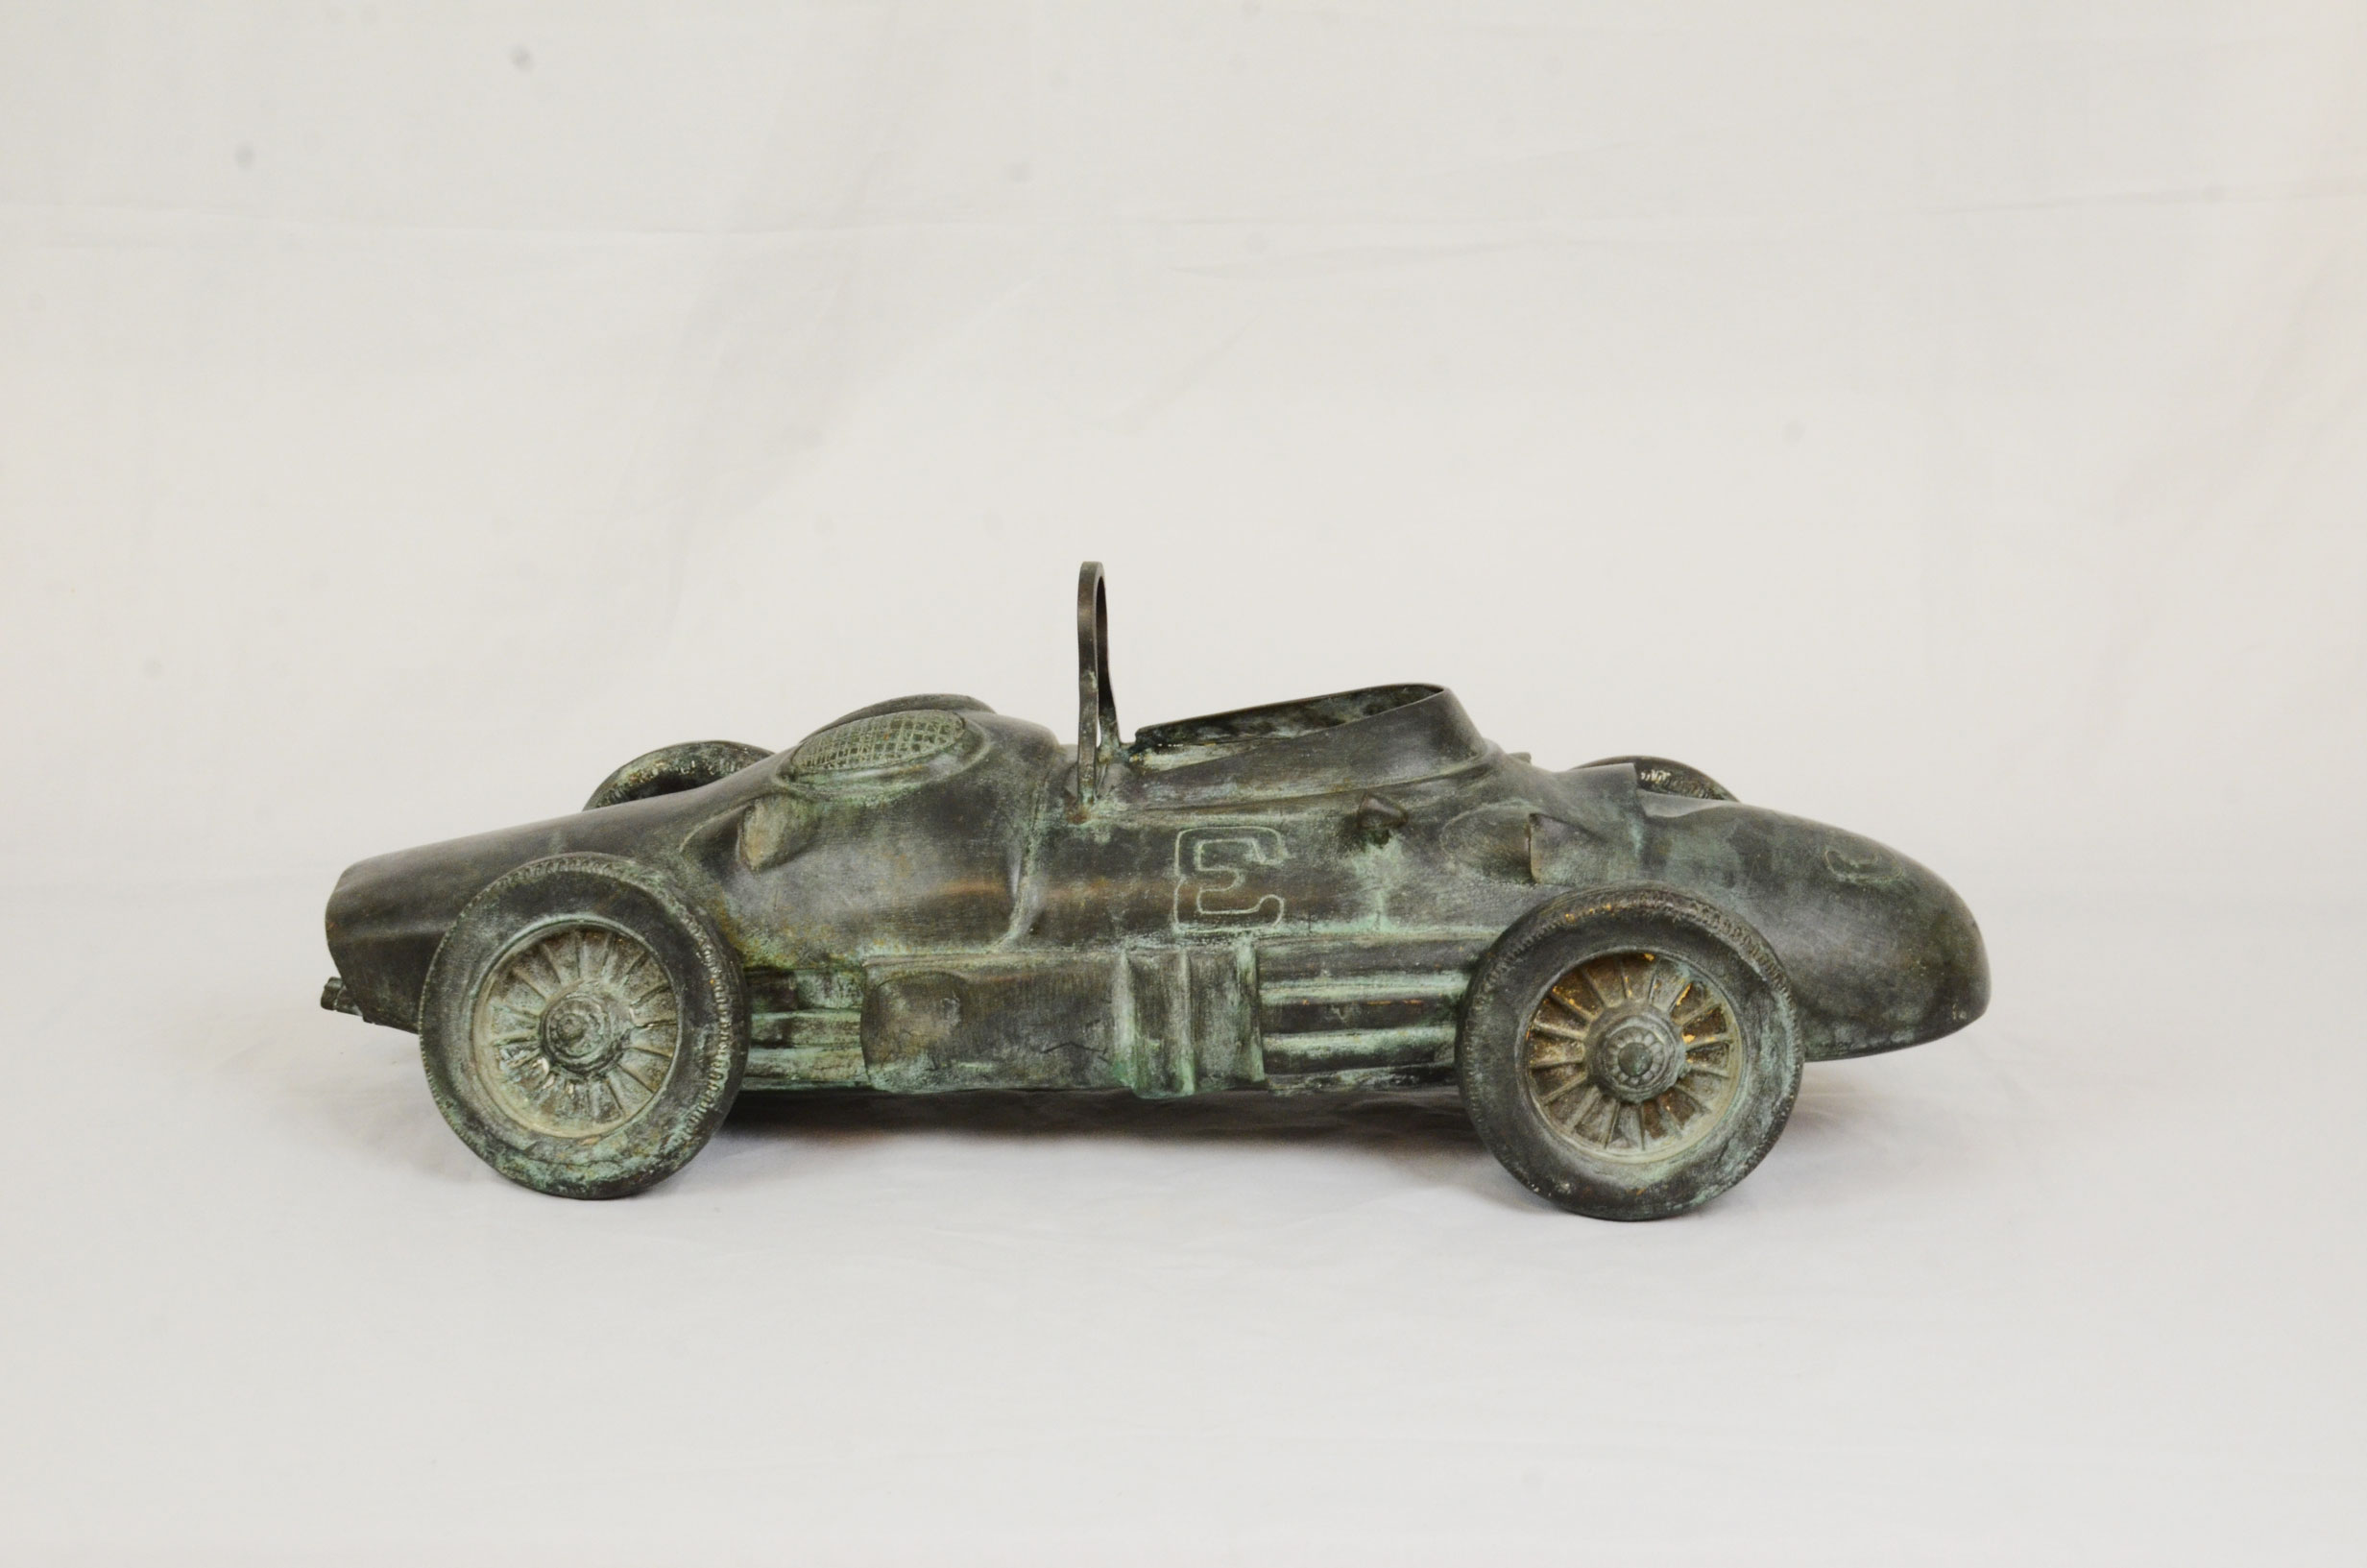 Vintage all brass racing car statue - Image 4 of 5